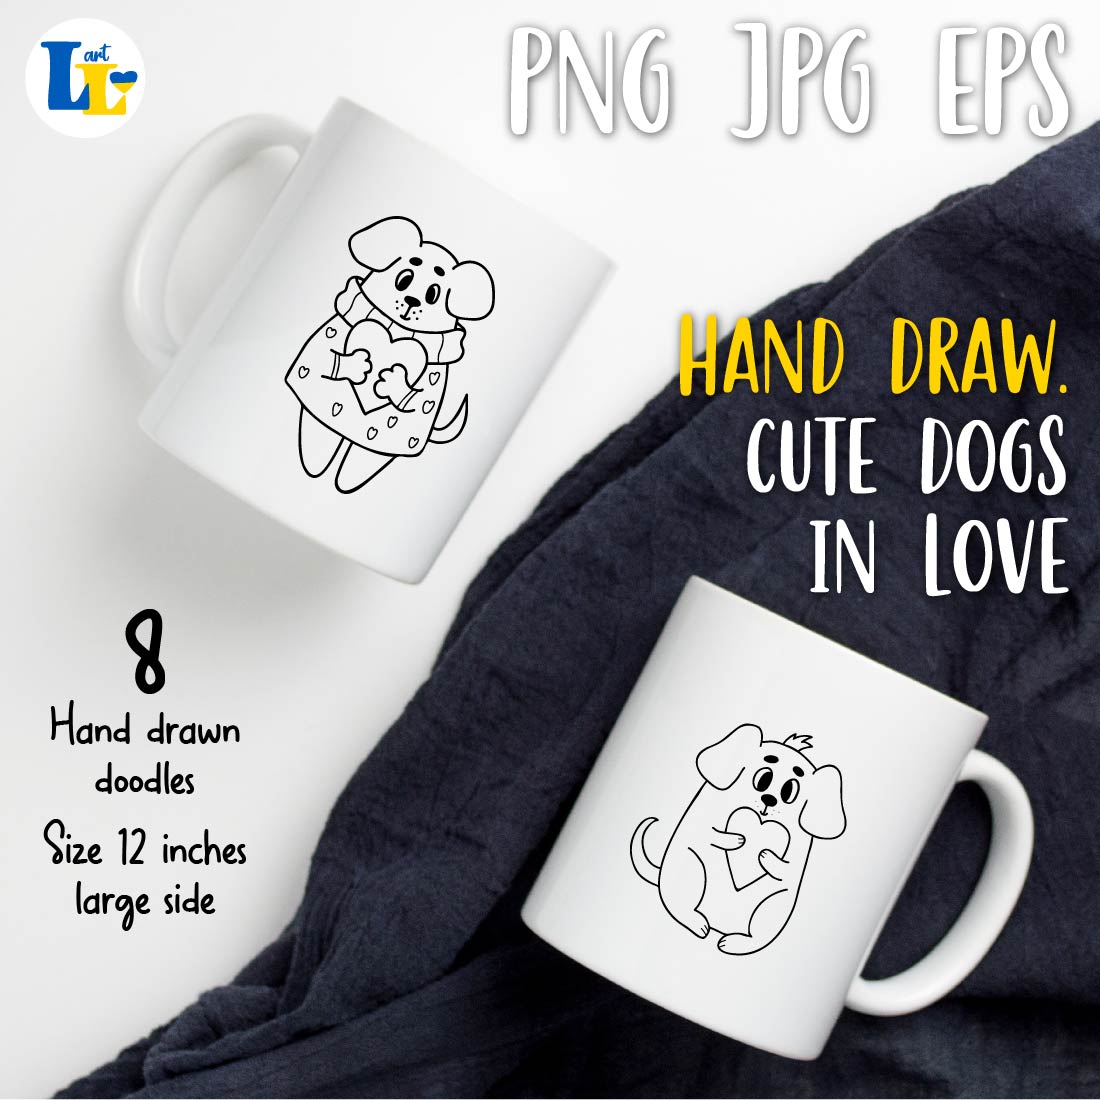 Cute Dog in Love Valentine Hand Drawn Set cover image.